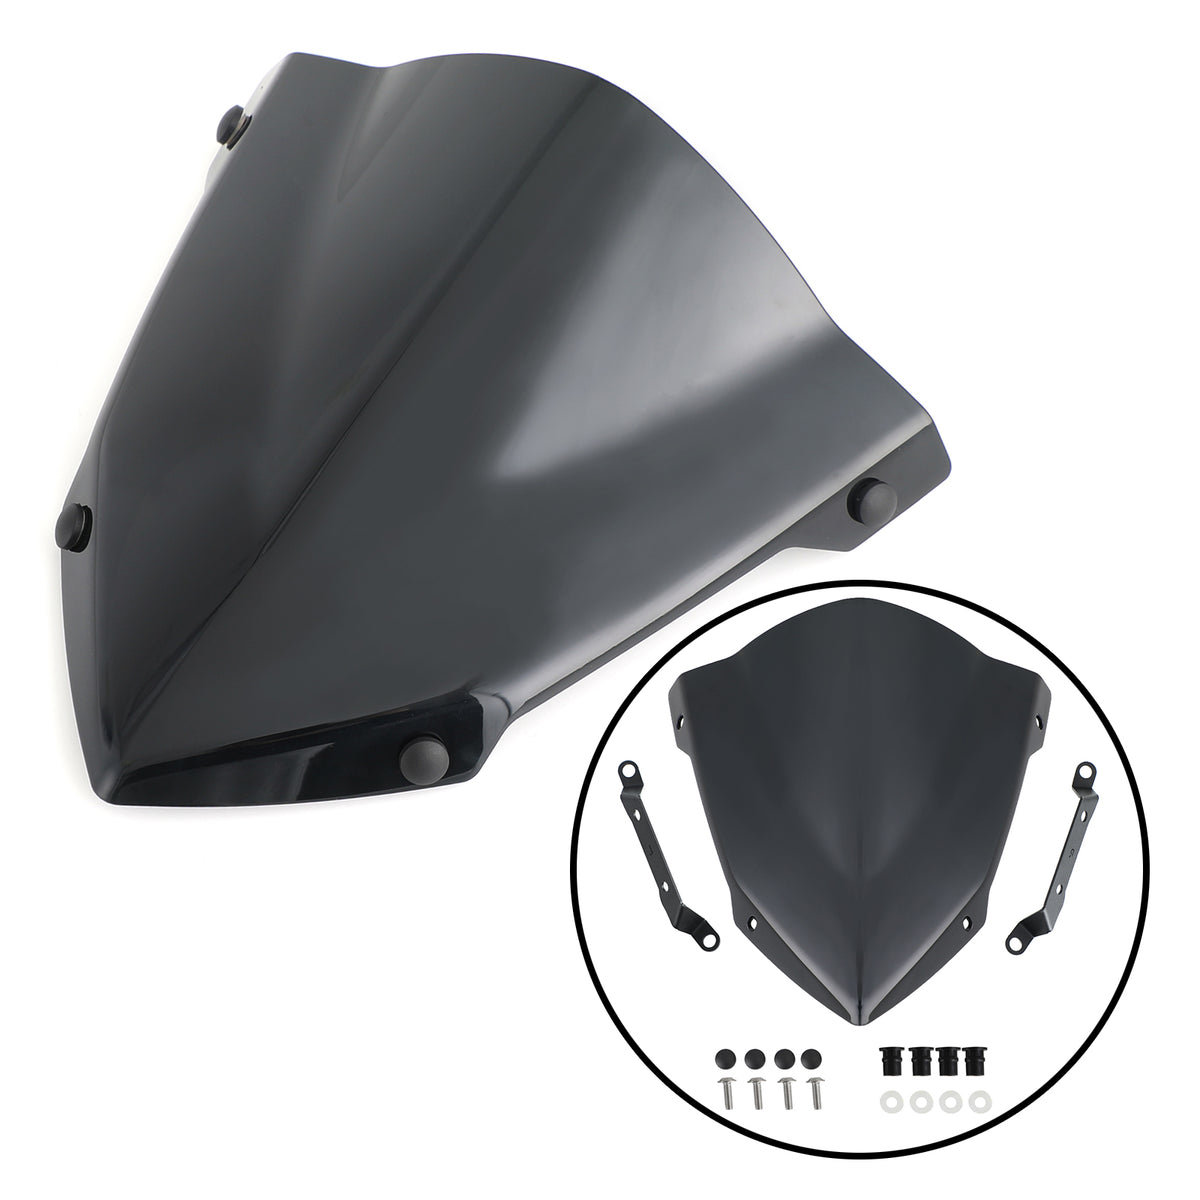 Windscreen Windshield Shield Protector fit for Yamaha MT-09 2014-2016 Generic